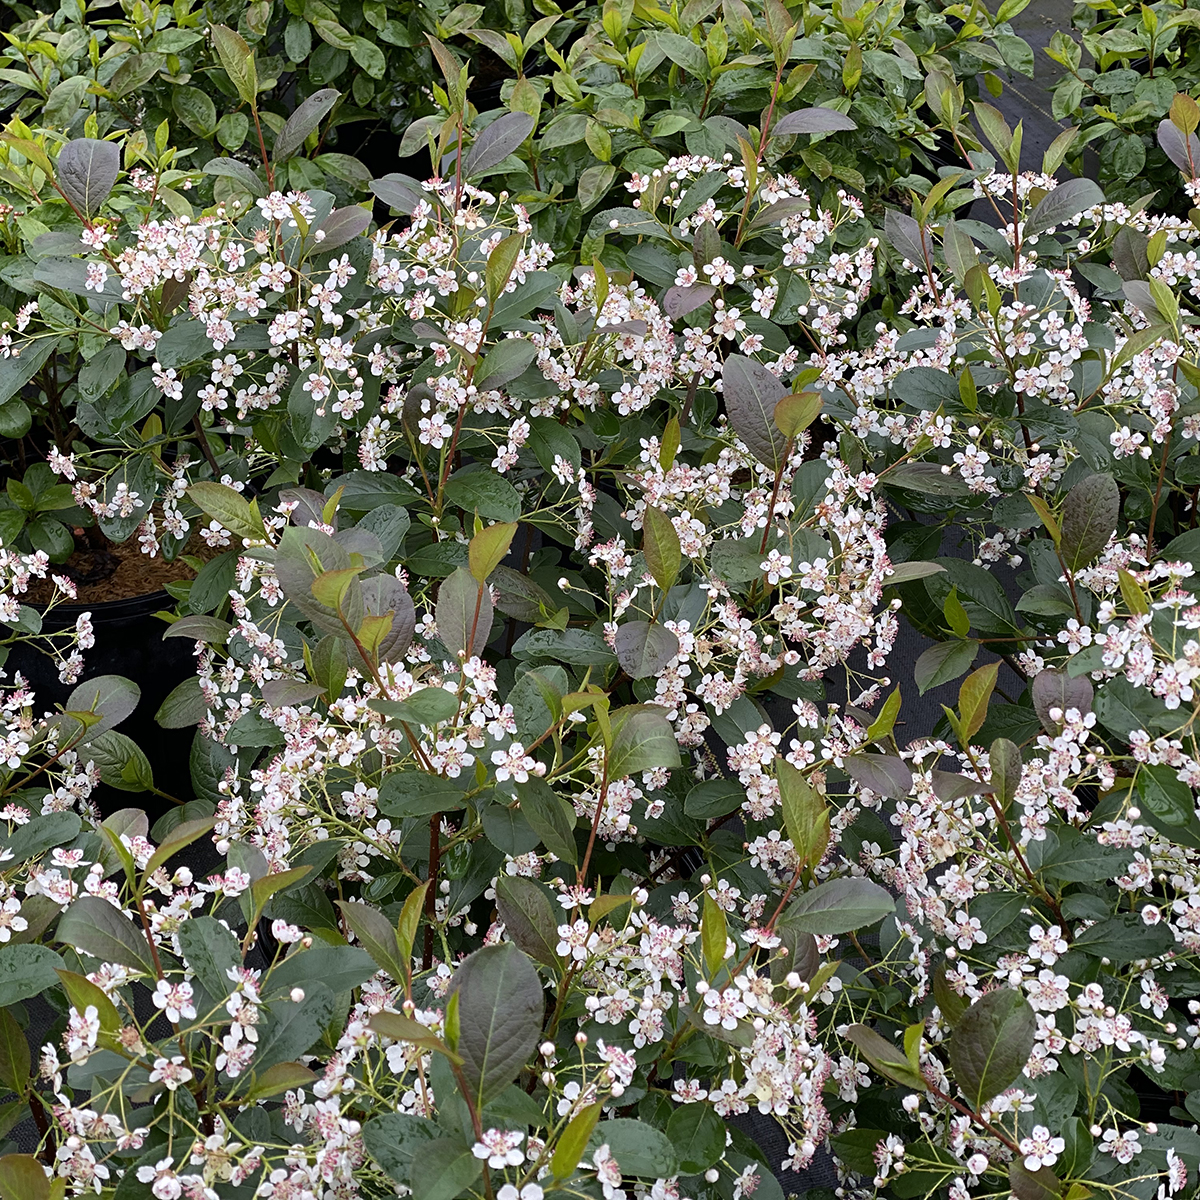 Low Scape Snowfire aronia is an extra-heavy-blooming selection. 